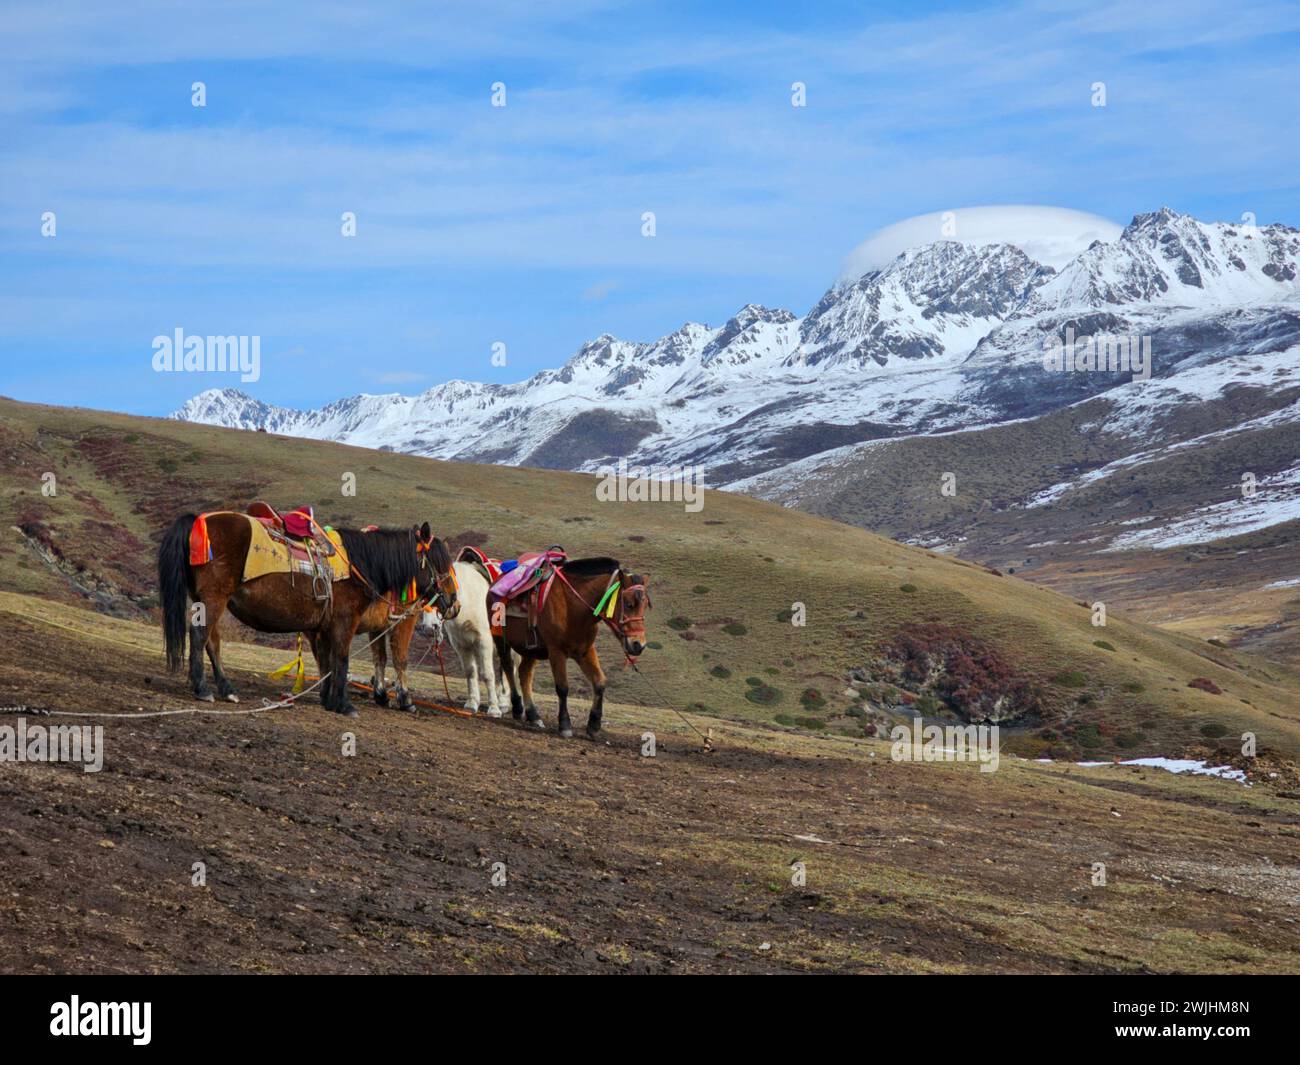 Some horses with backpacks trekking through mountains Stock Photo